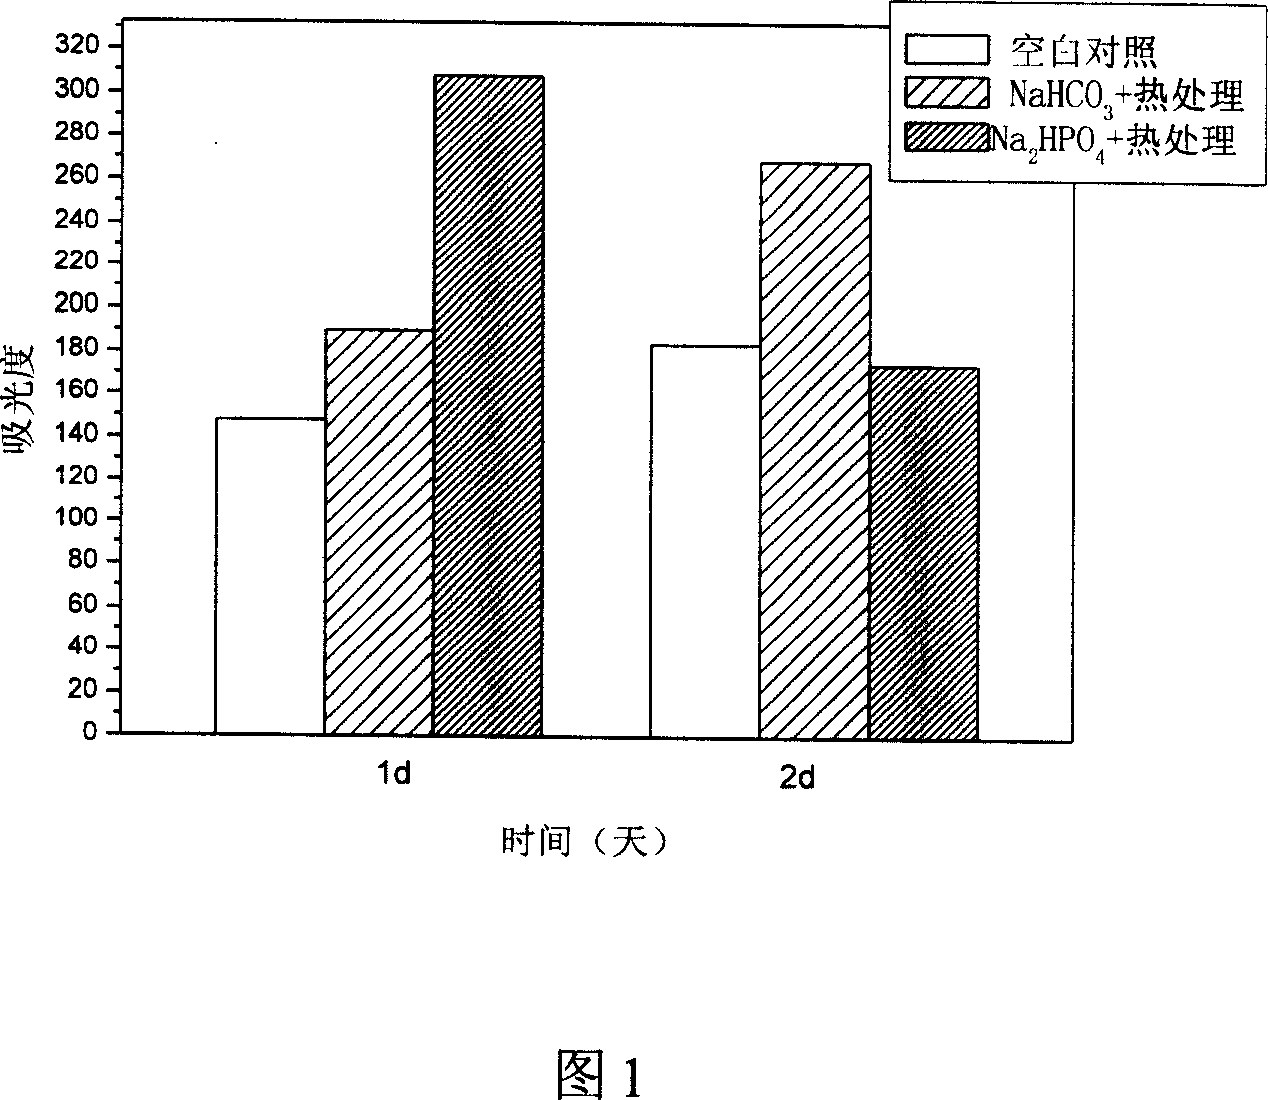 Material for bone tissue engineering scaffold and making method thereof